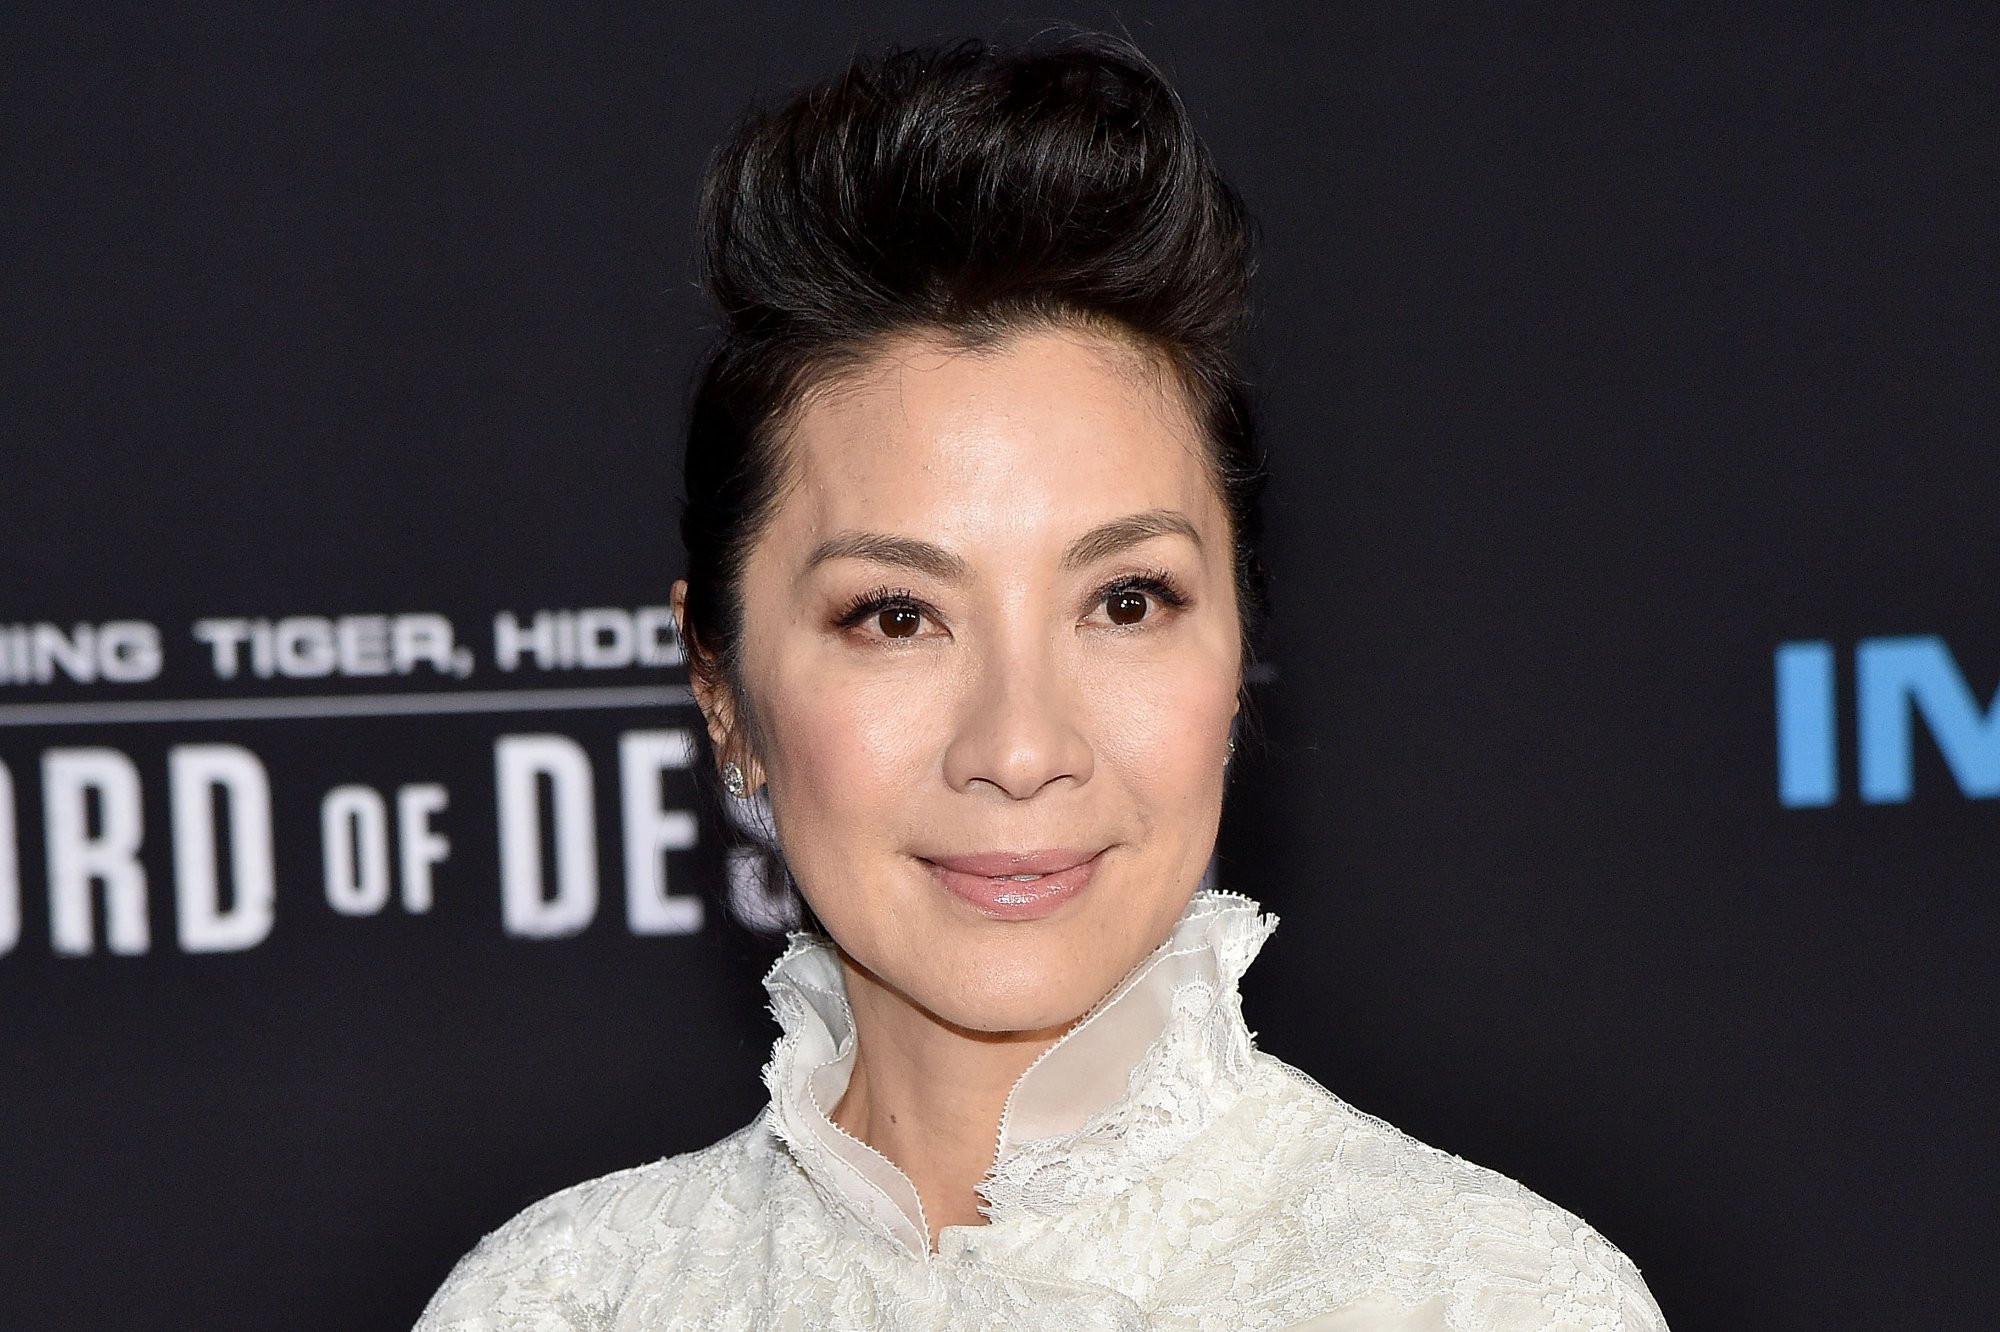 'Crouching Tiger, Hidden Dragon' star Michelle Yeoh, the film where she had a bad accident standing in front of a step and repeat